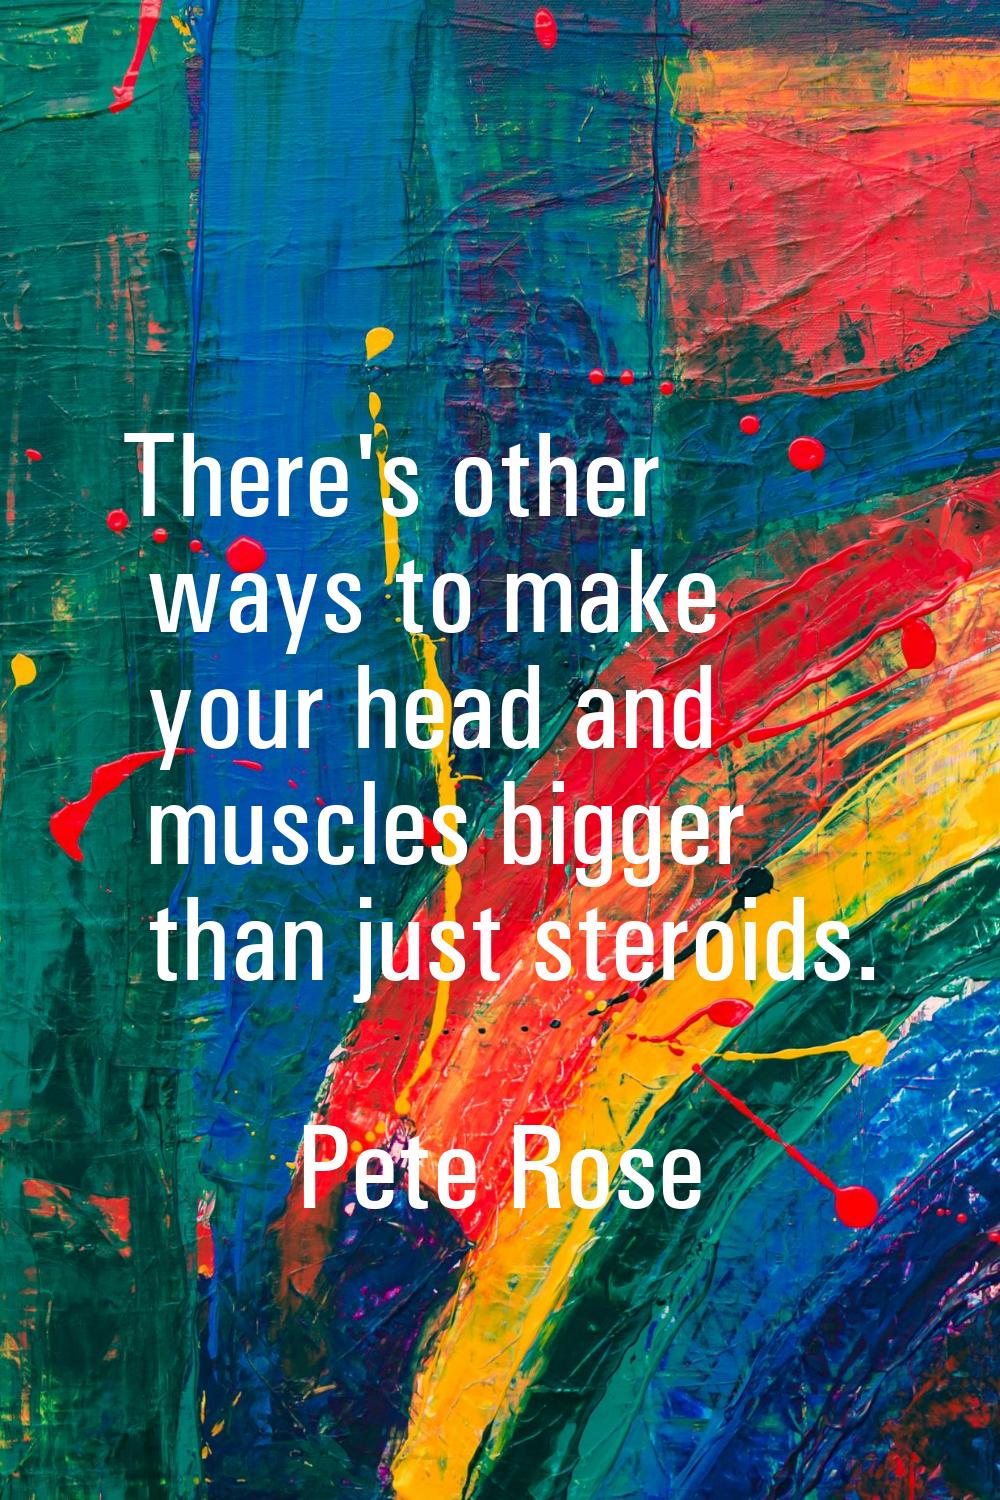 There's other ways to make your head and muscles bigger than just steroids.